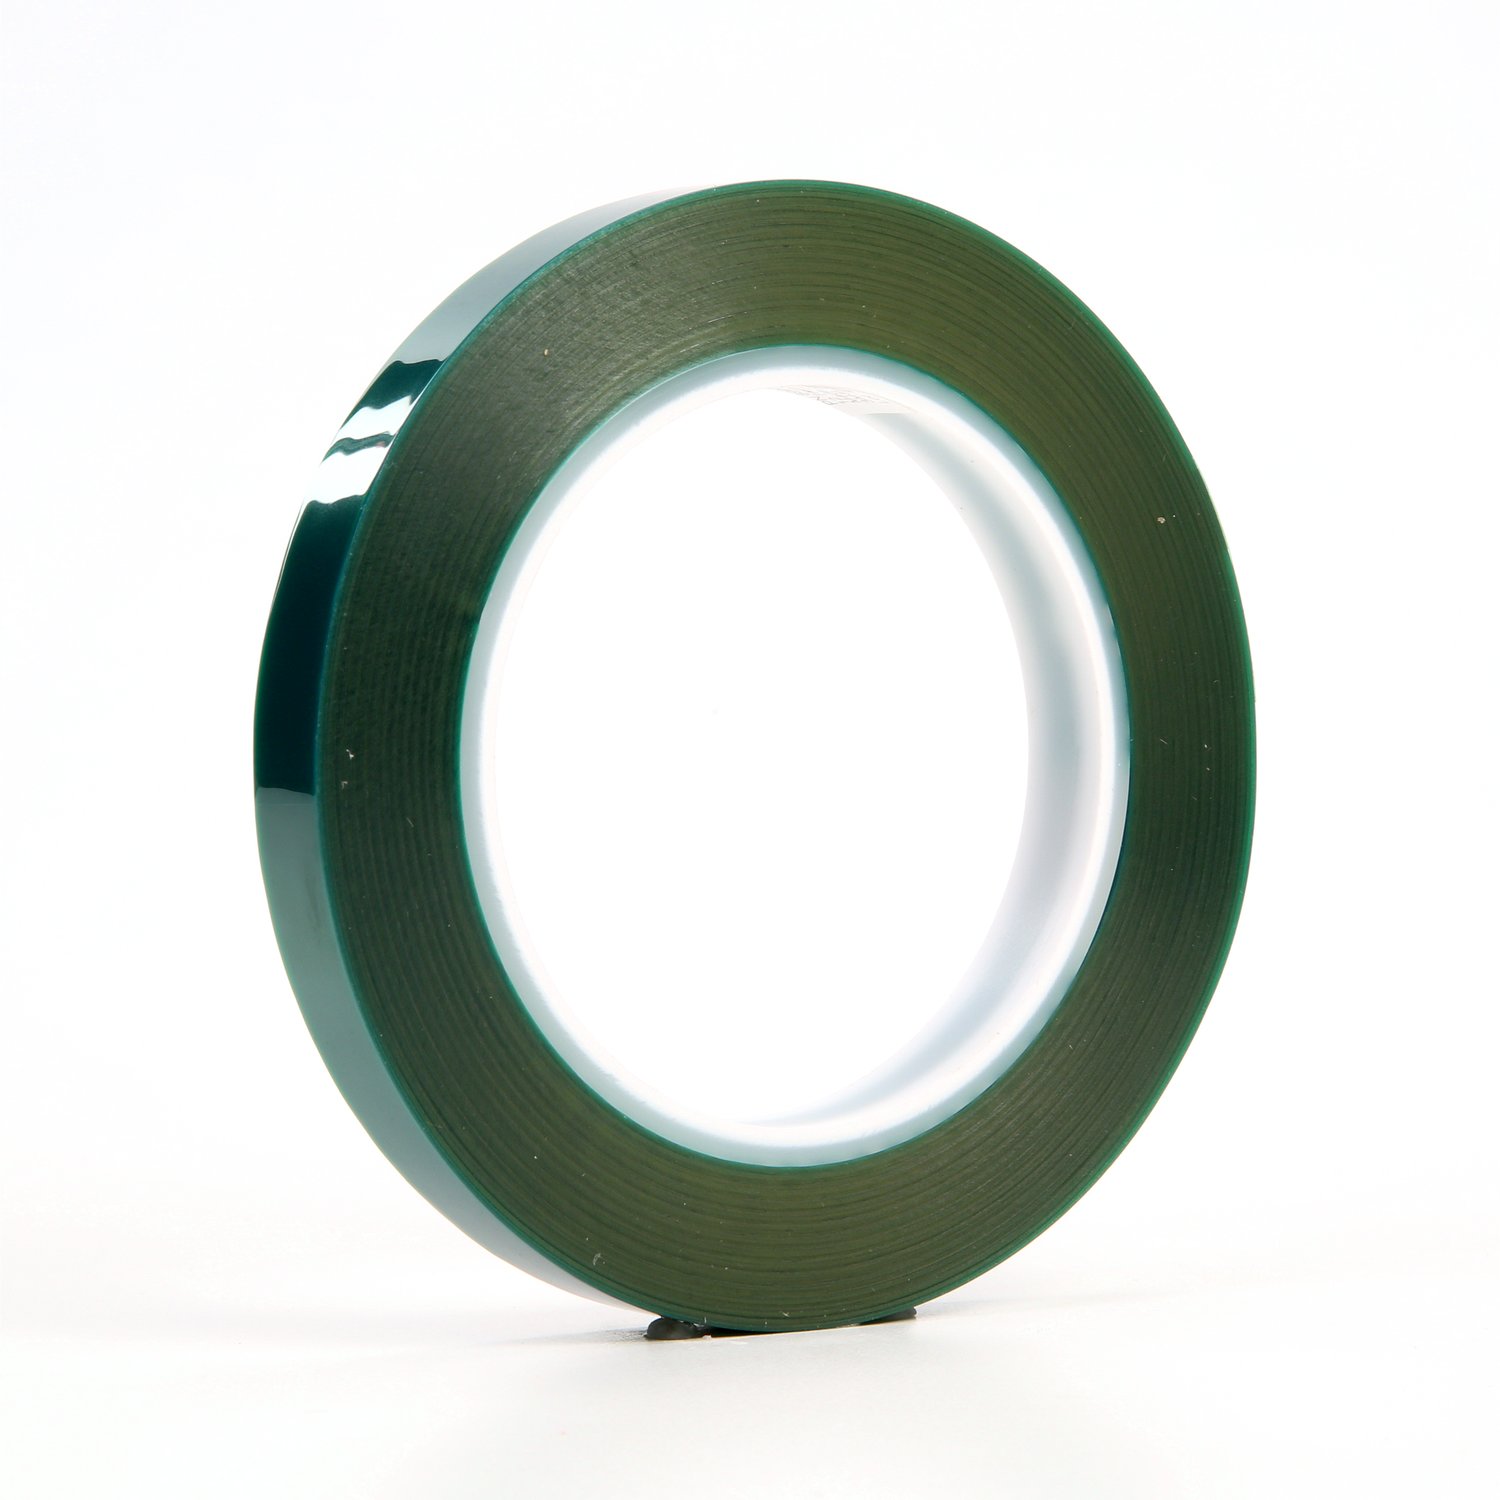 7100035875 - 3M Polyester Tape 8992, Green, 1/2 in x 72 yd, 3.2 mil, 72 rolls per
case